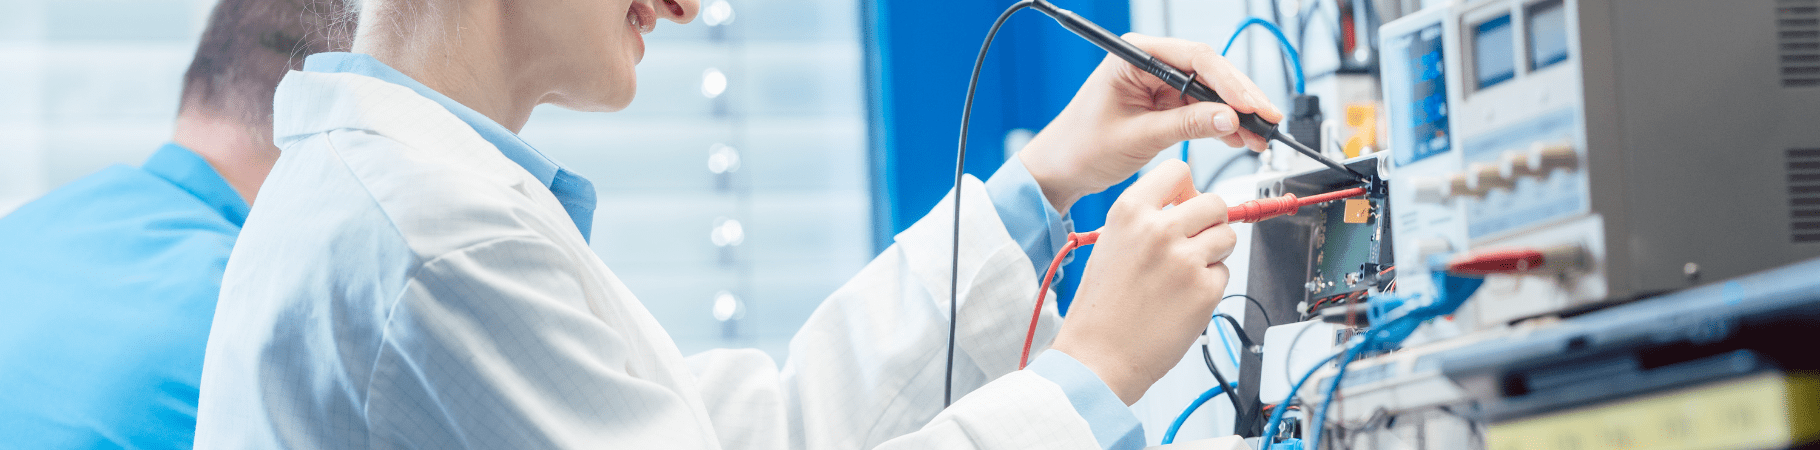 Engineer in a white coat testing and measuring various electrical devices